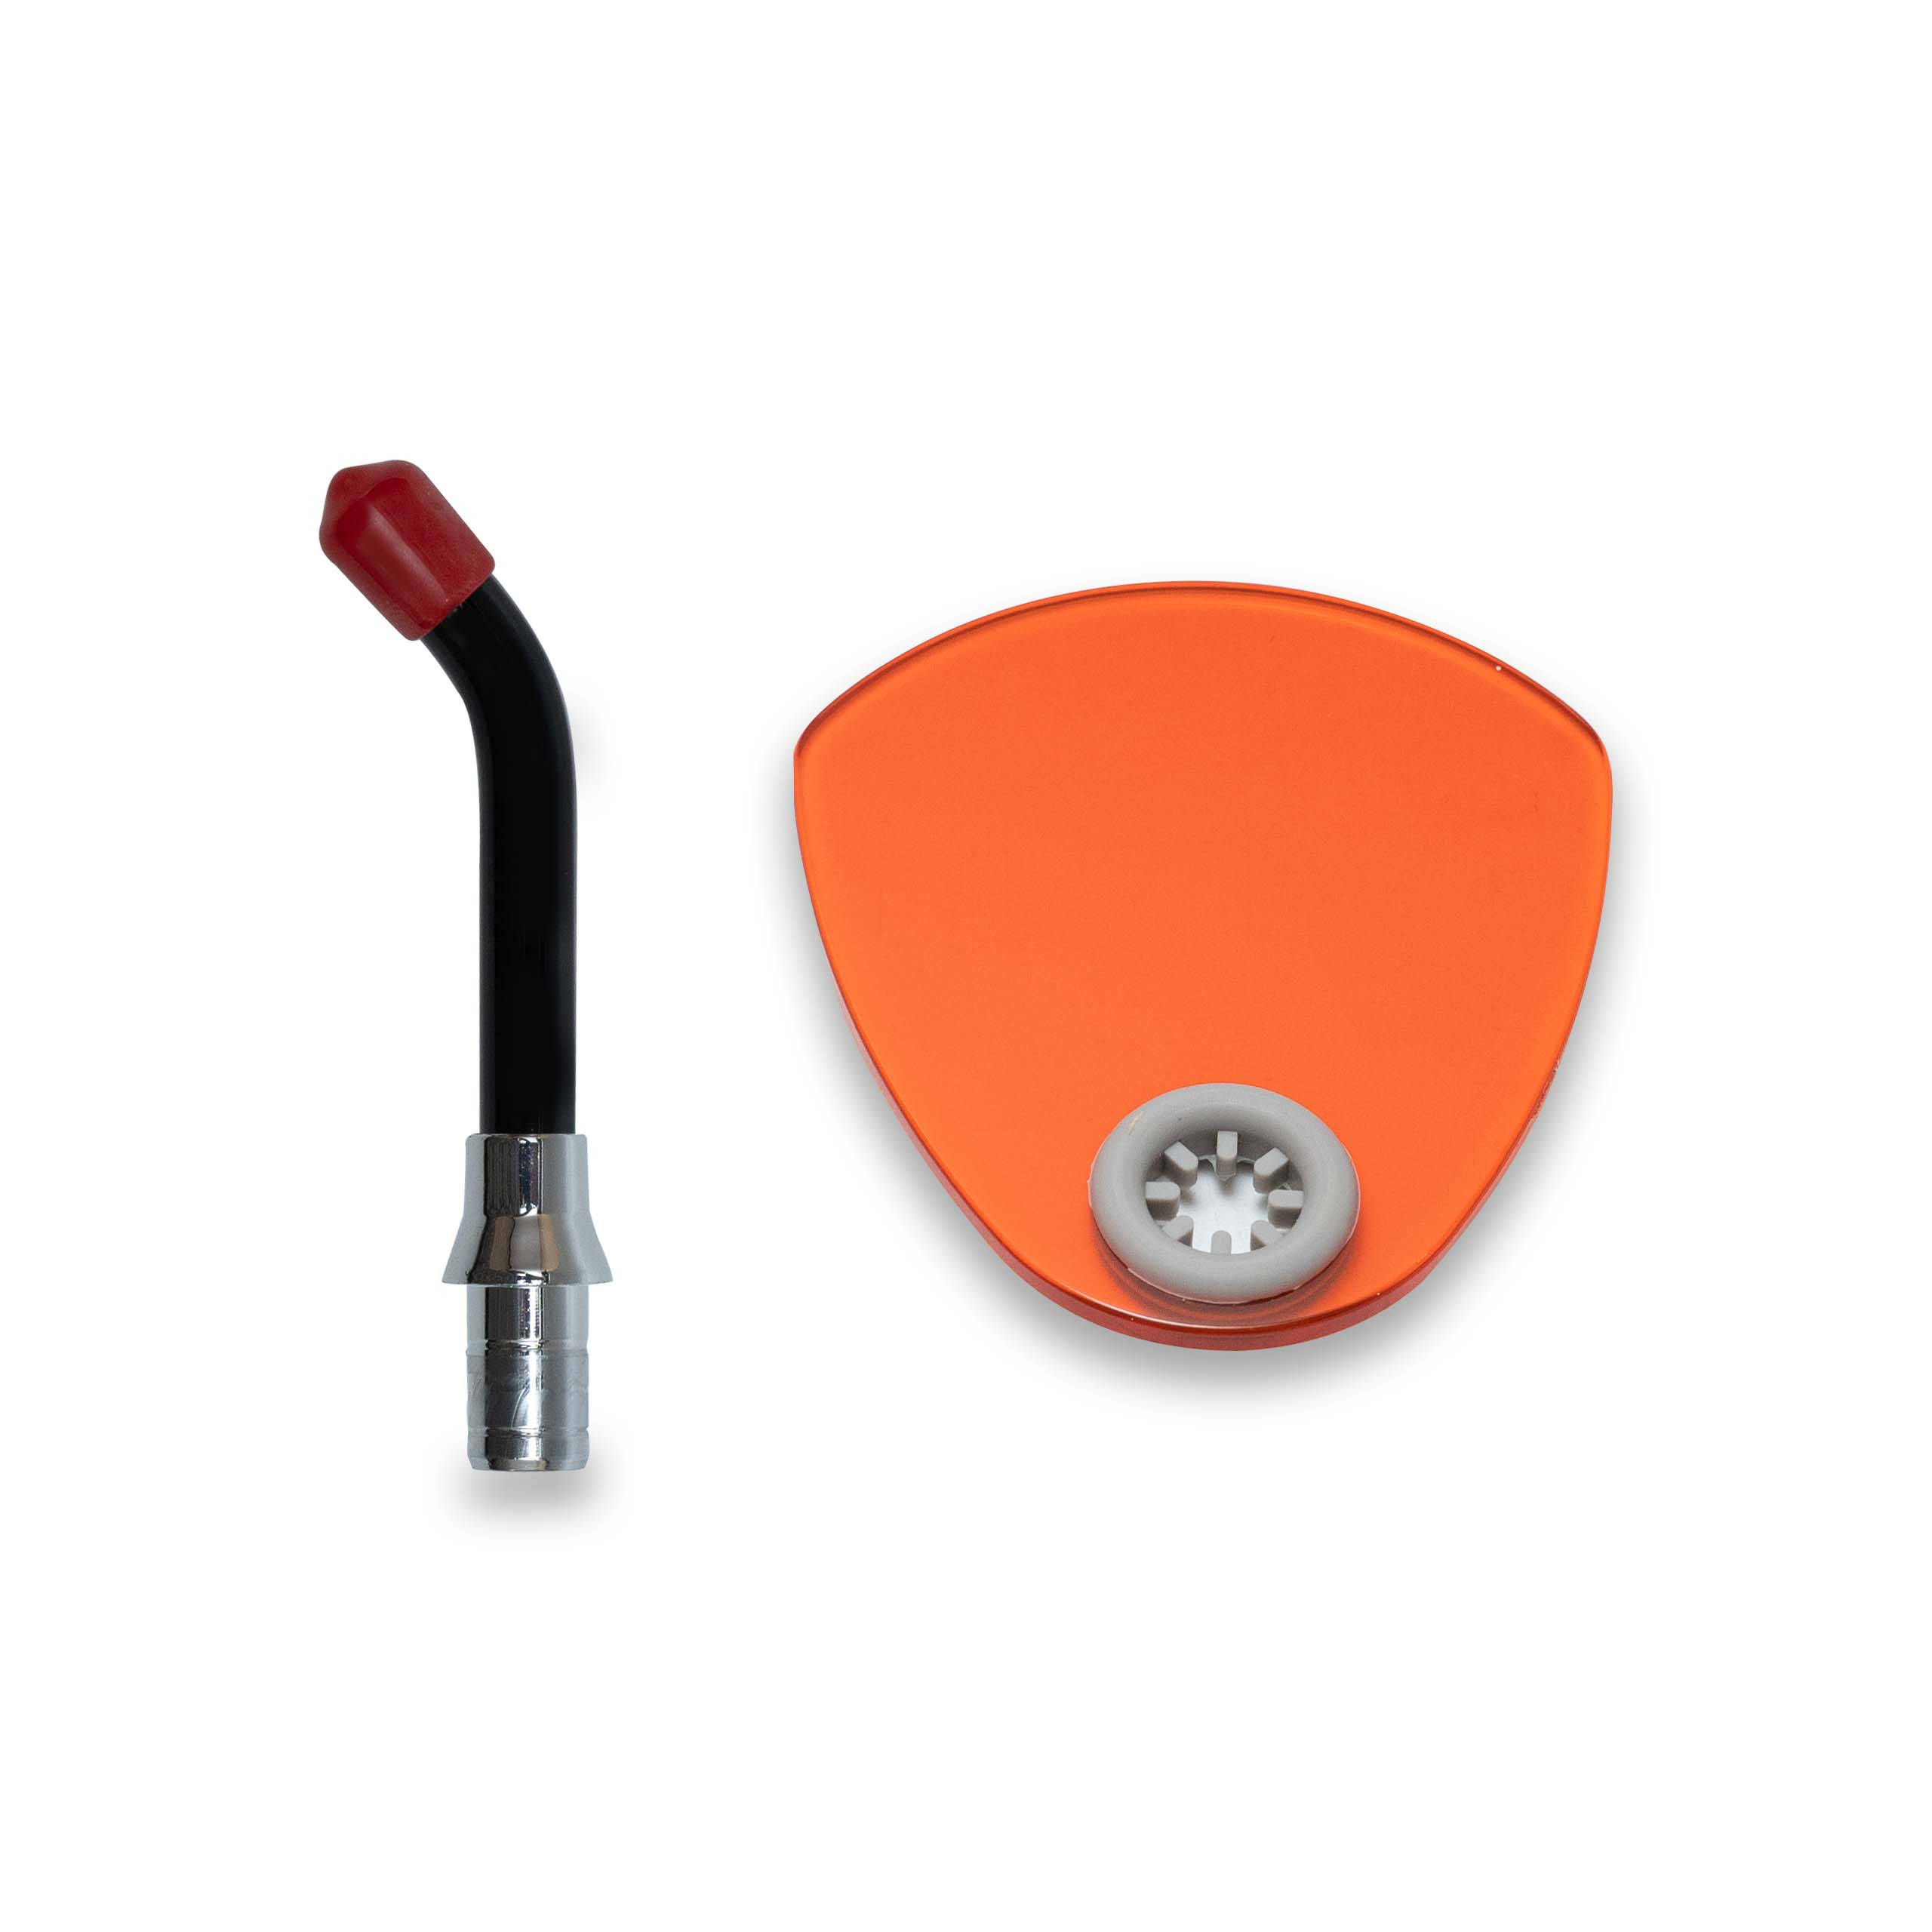 Woodpecker LED Curing Light 5 Sec Wire And Wireless